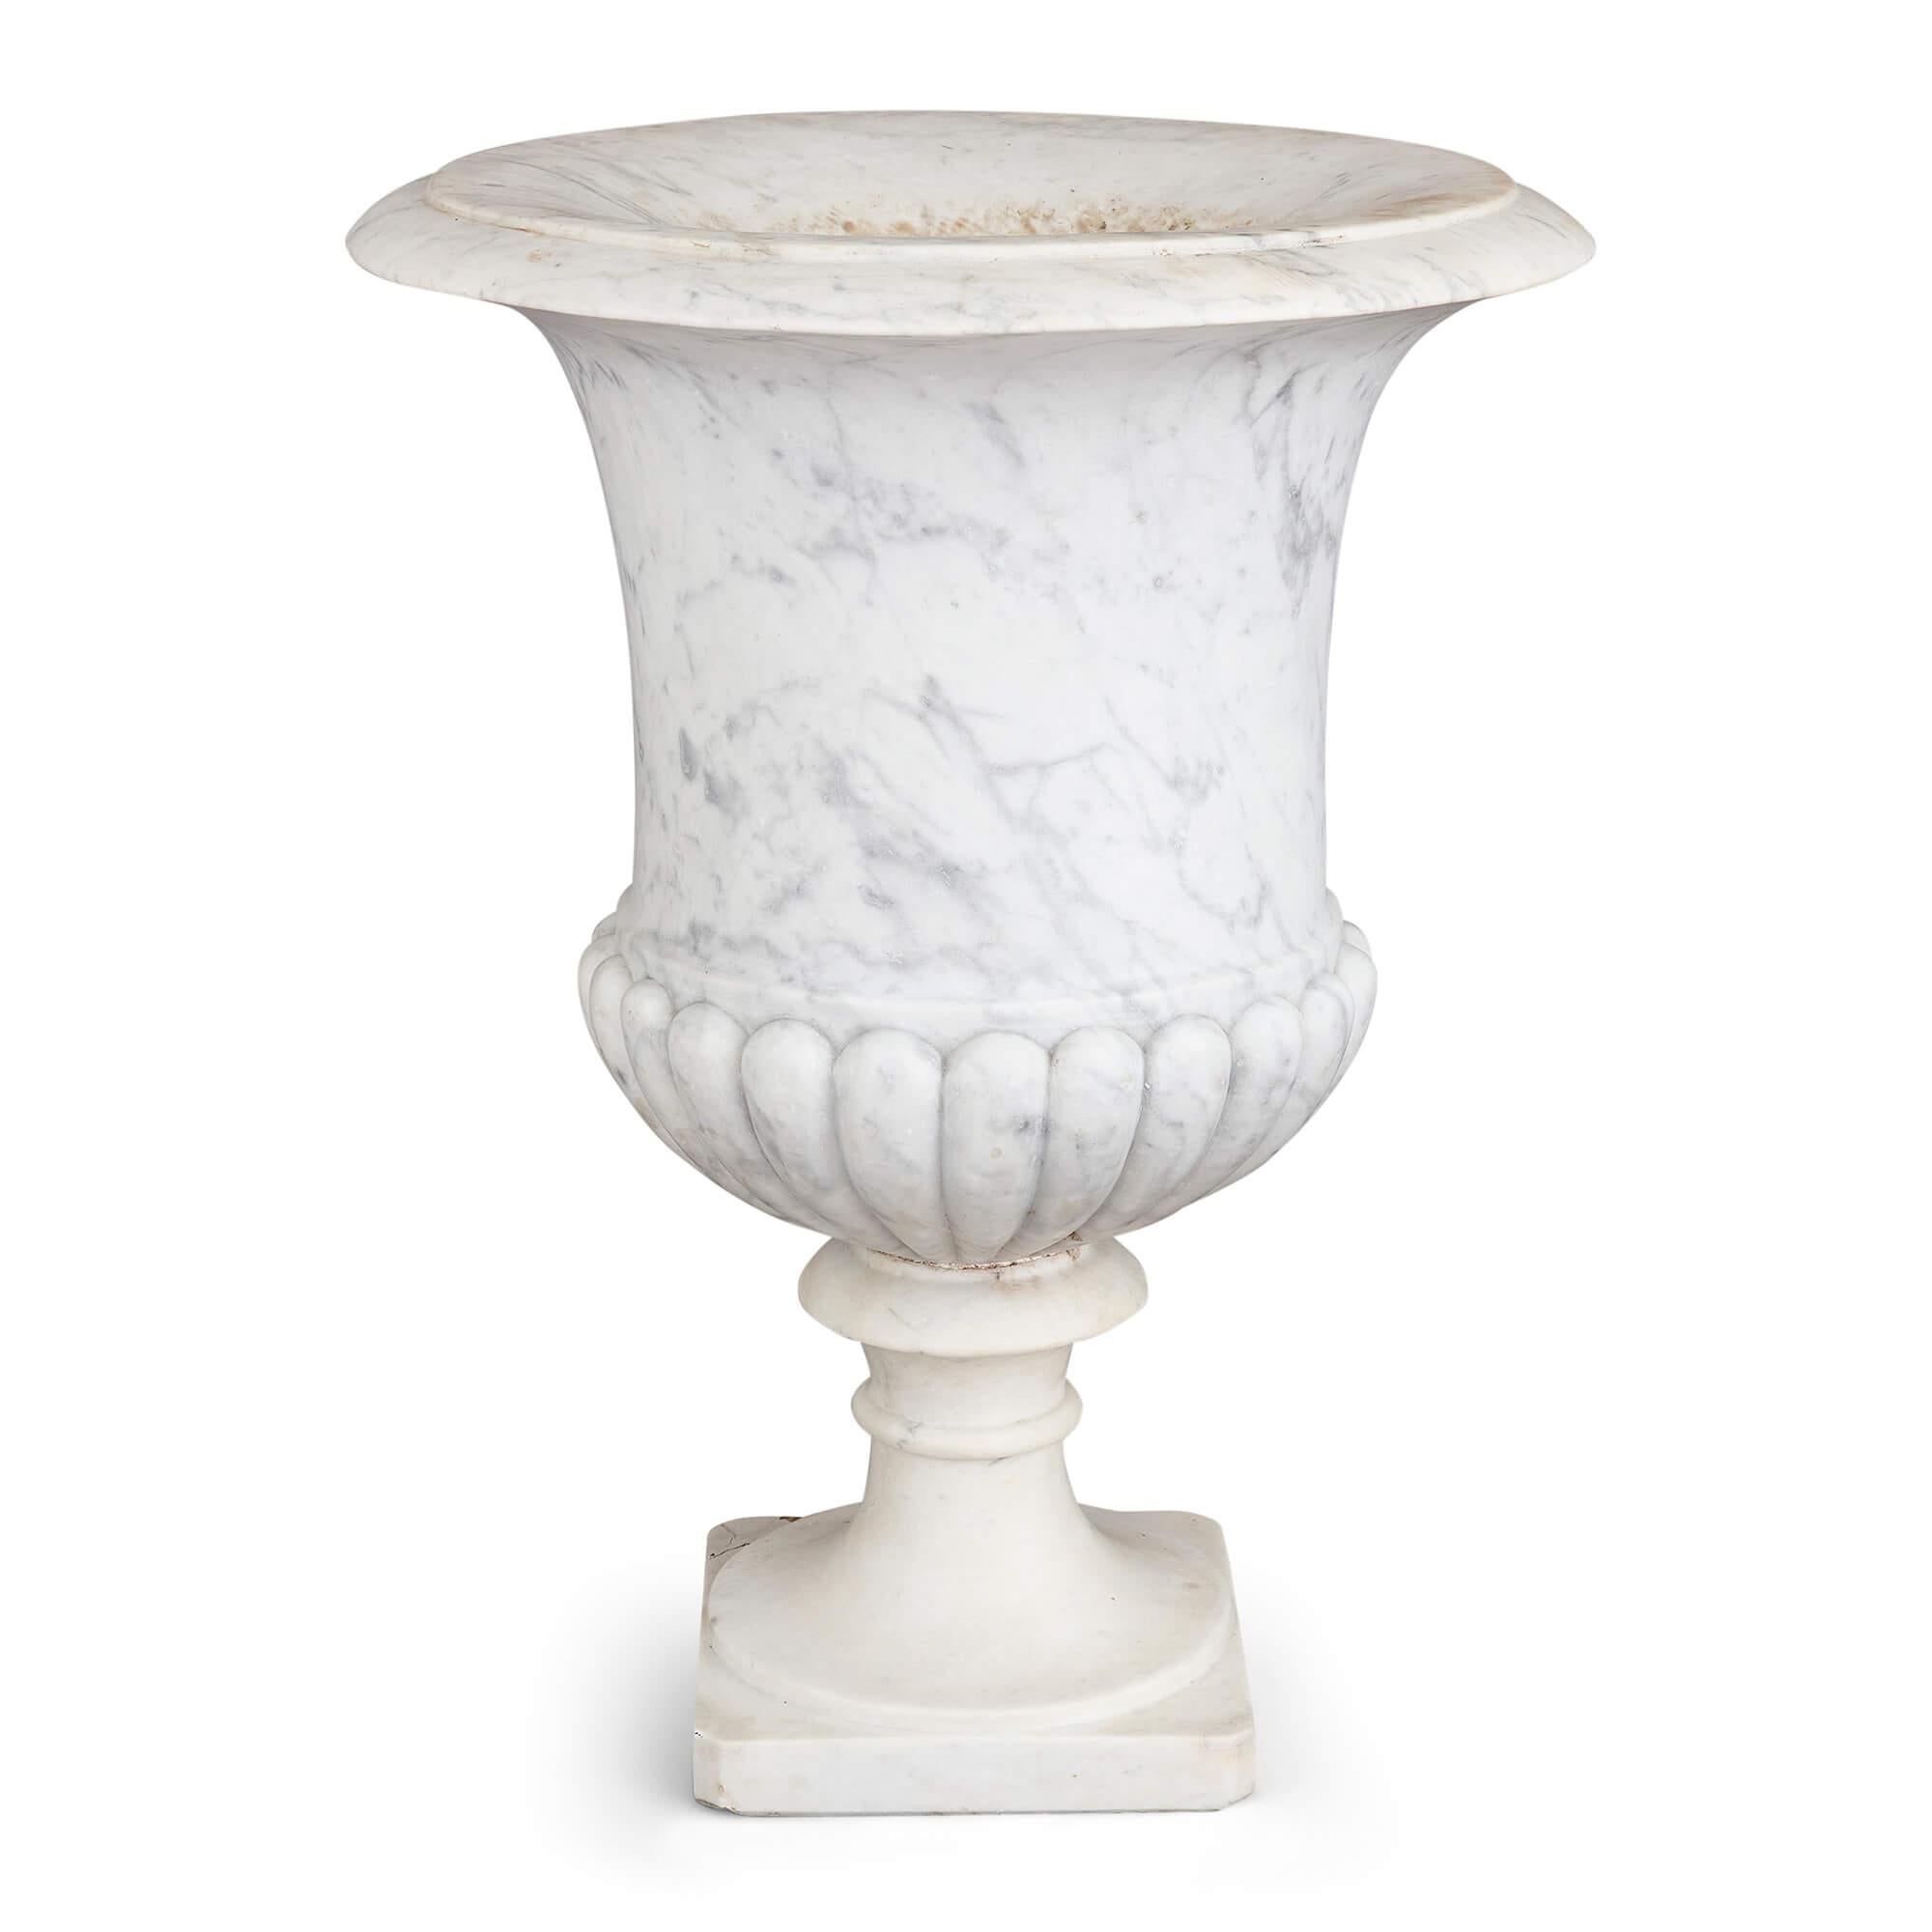 Large antique carved white marble Medici vase garden urn 
Continental, 20th Century
Height 73cm, diameter 55cm

Crafted in the 20th century, this radiant white marble garden urn emanates an aura of timeless elegance. Drawing its aesthetic